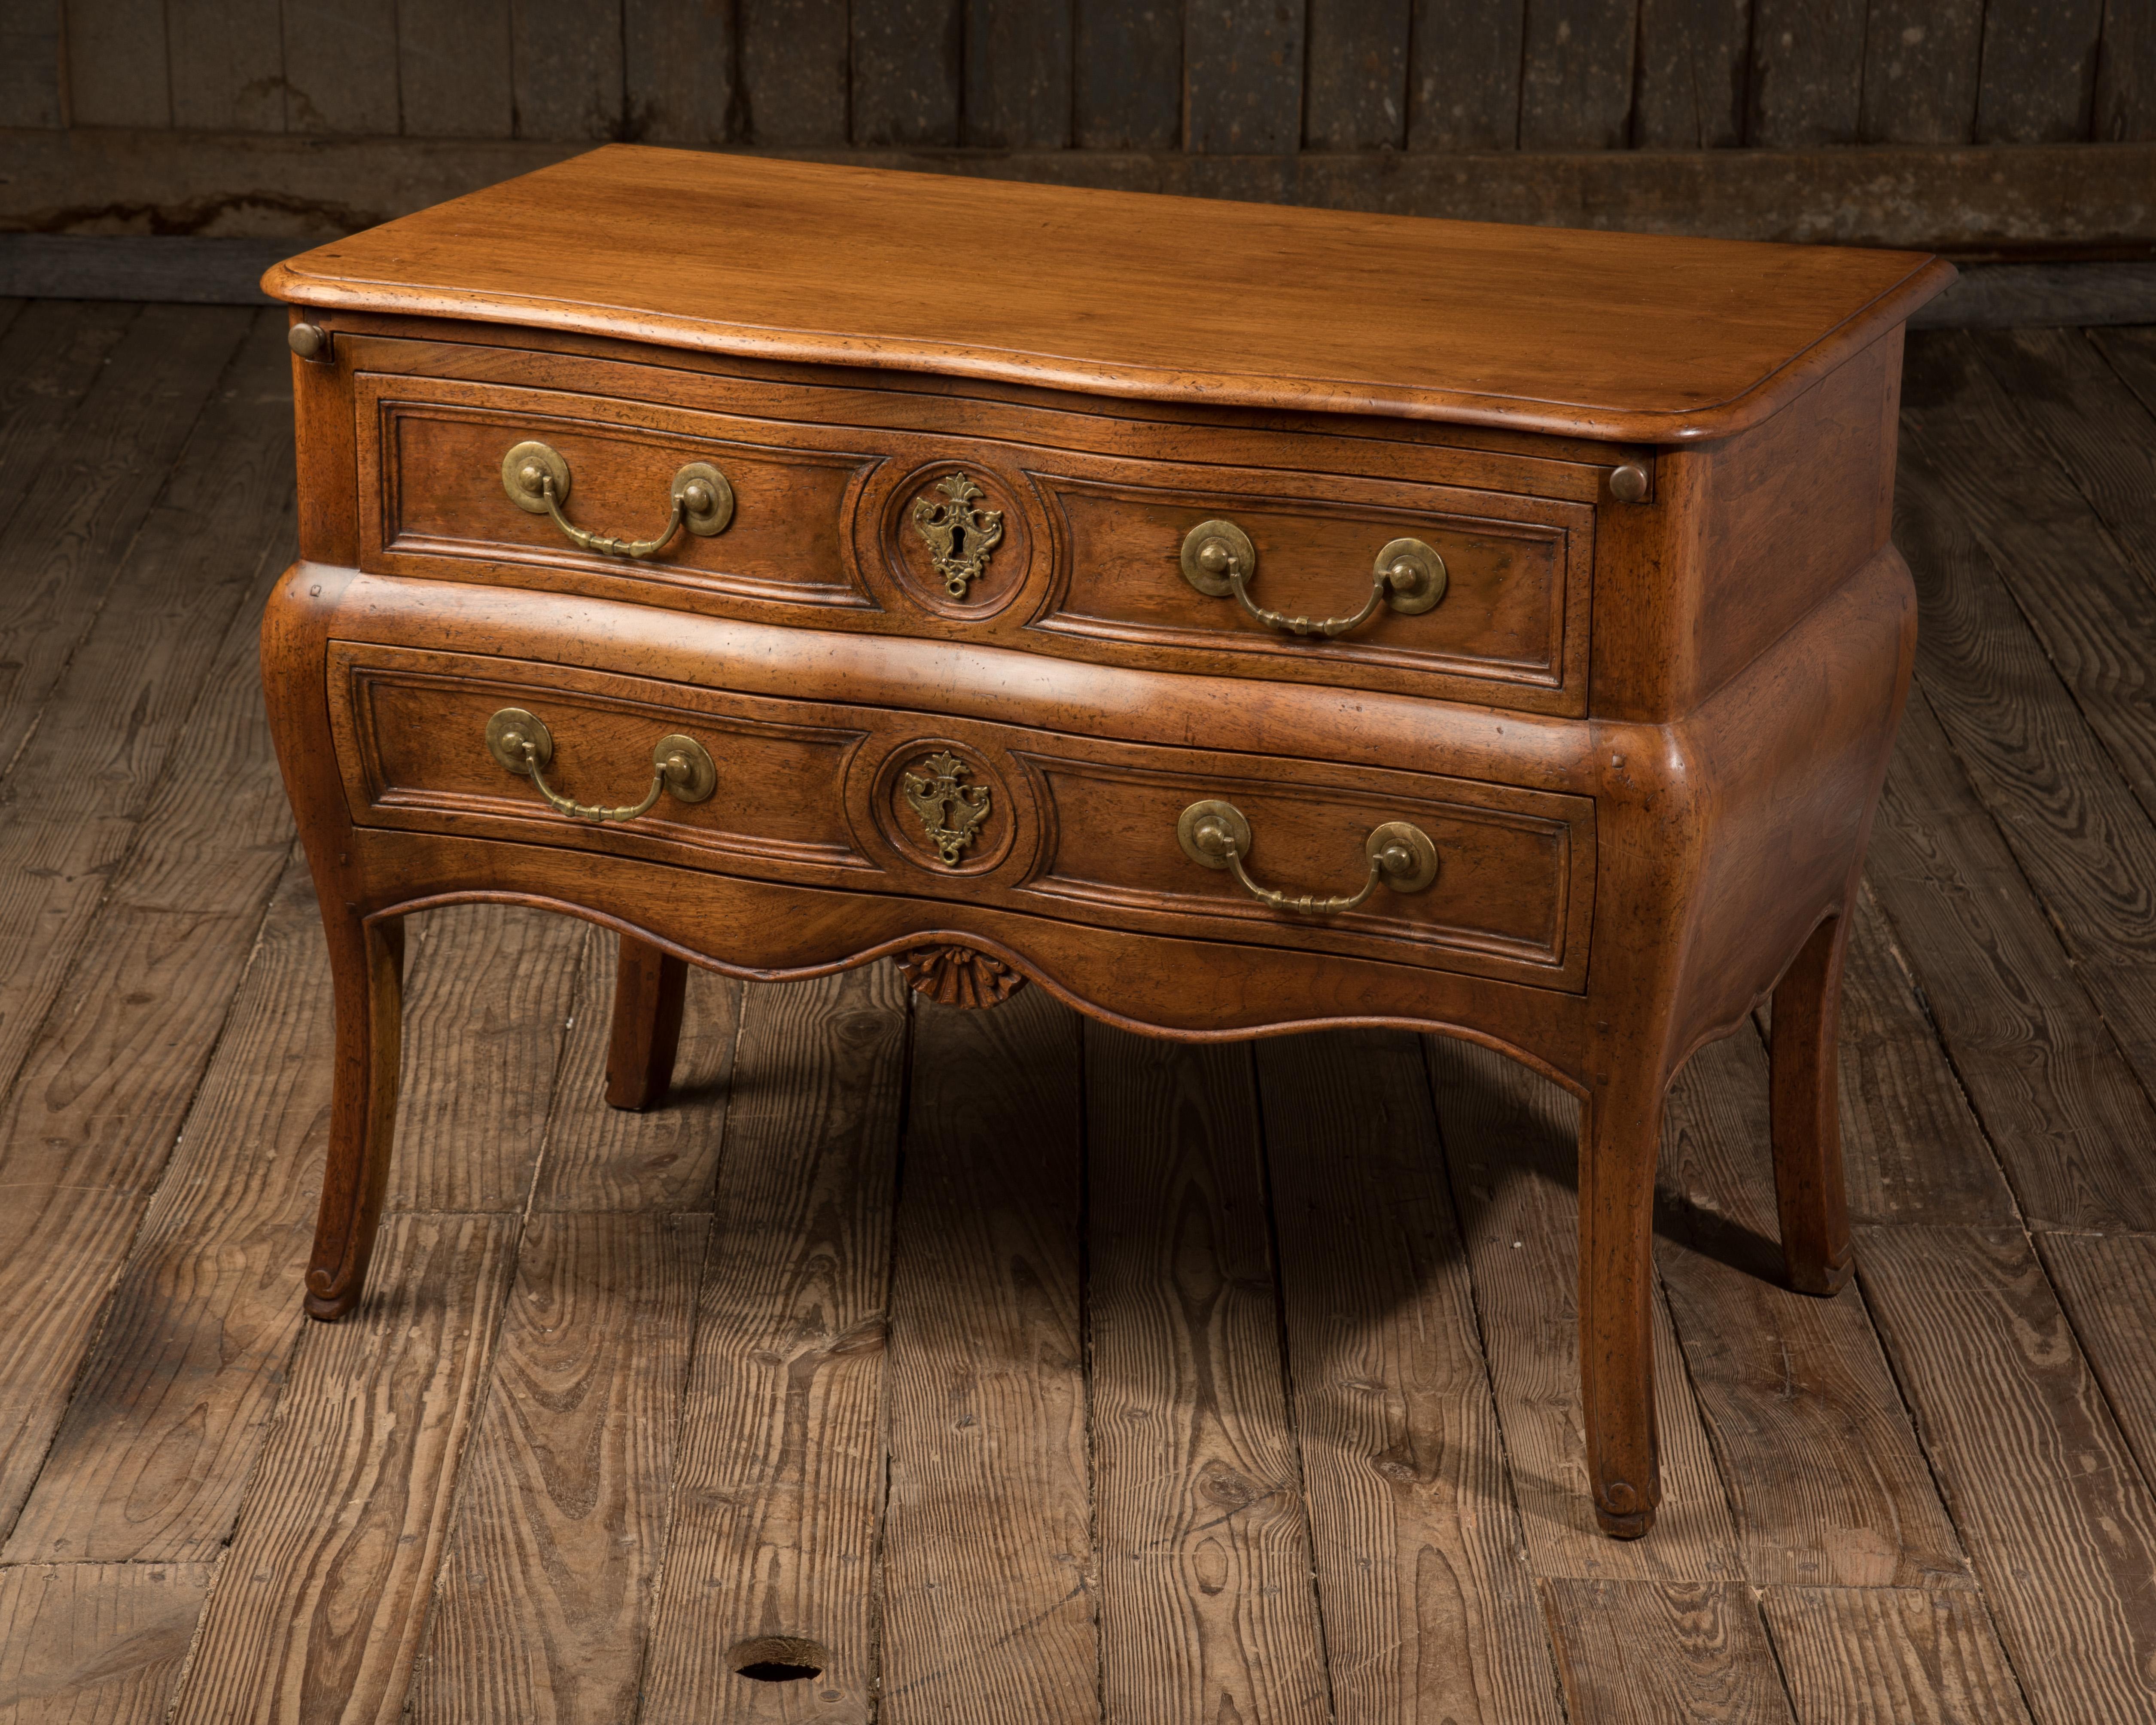 Very handsome beautifully crafted two-drawer commode in solid walnut by master cabinetmaker Don Ruseau, having hand-forged original brass hardware and lovely carving. Pull-out flat surface for extra space to lay out the newspaper or breakfast in